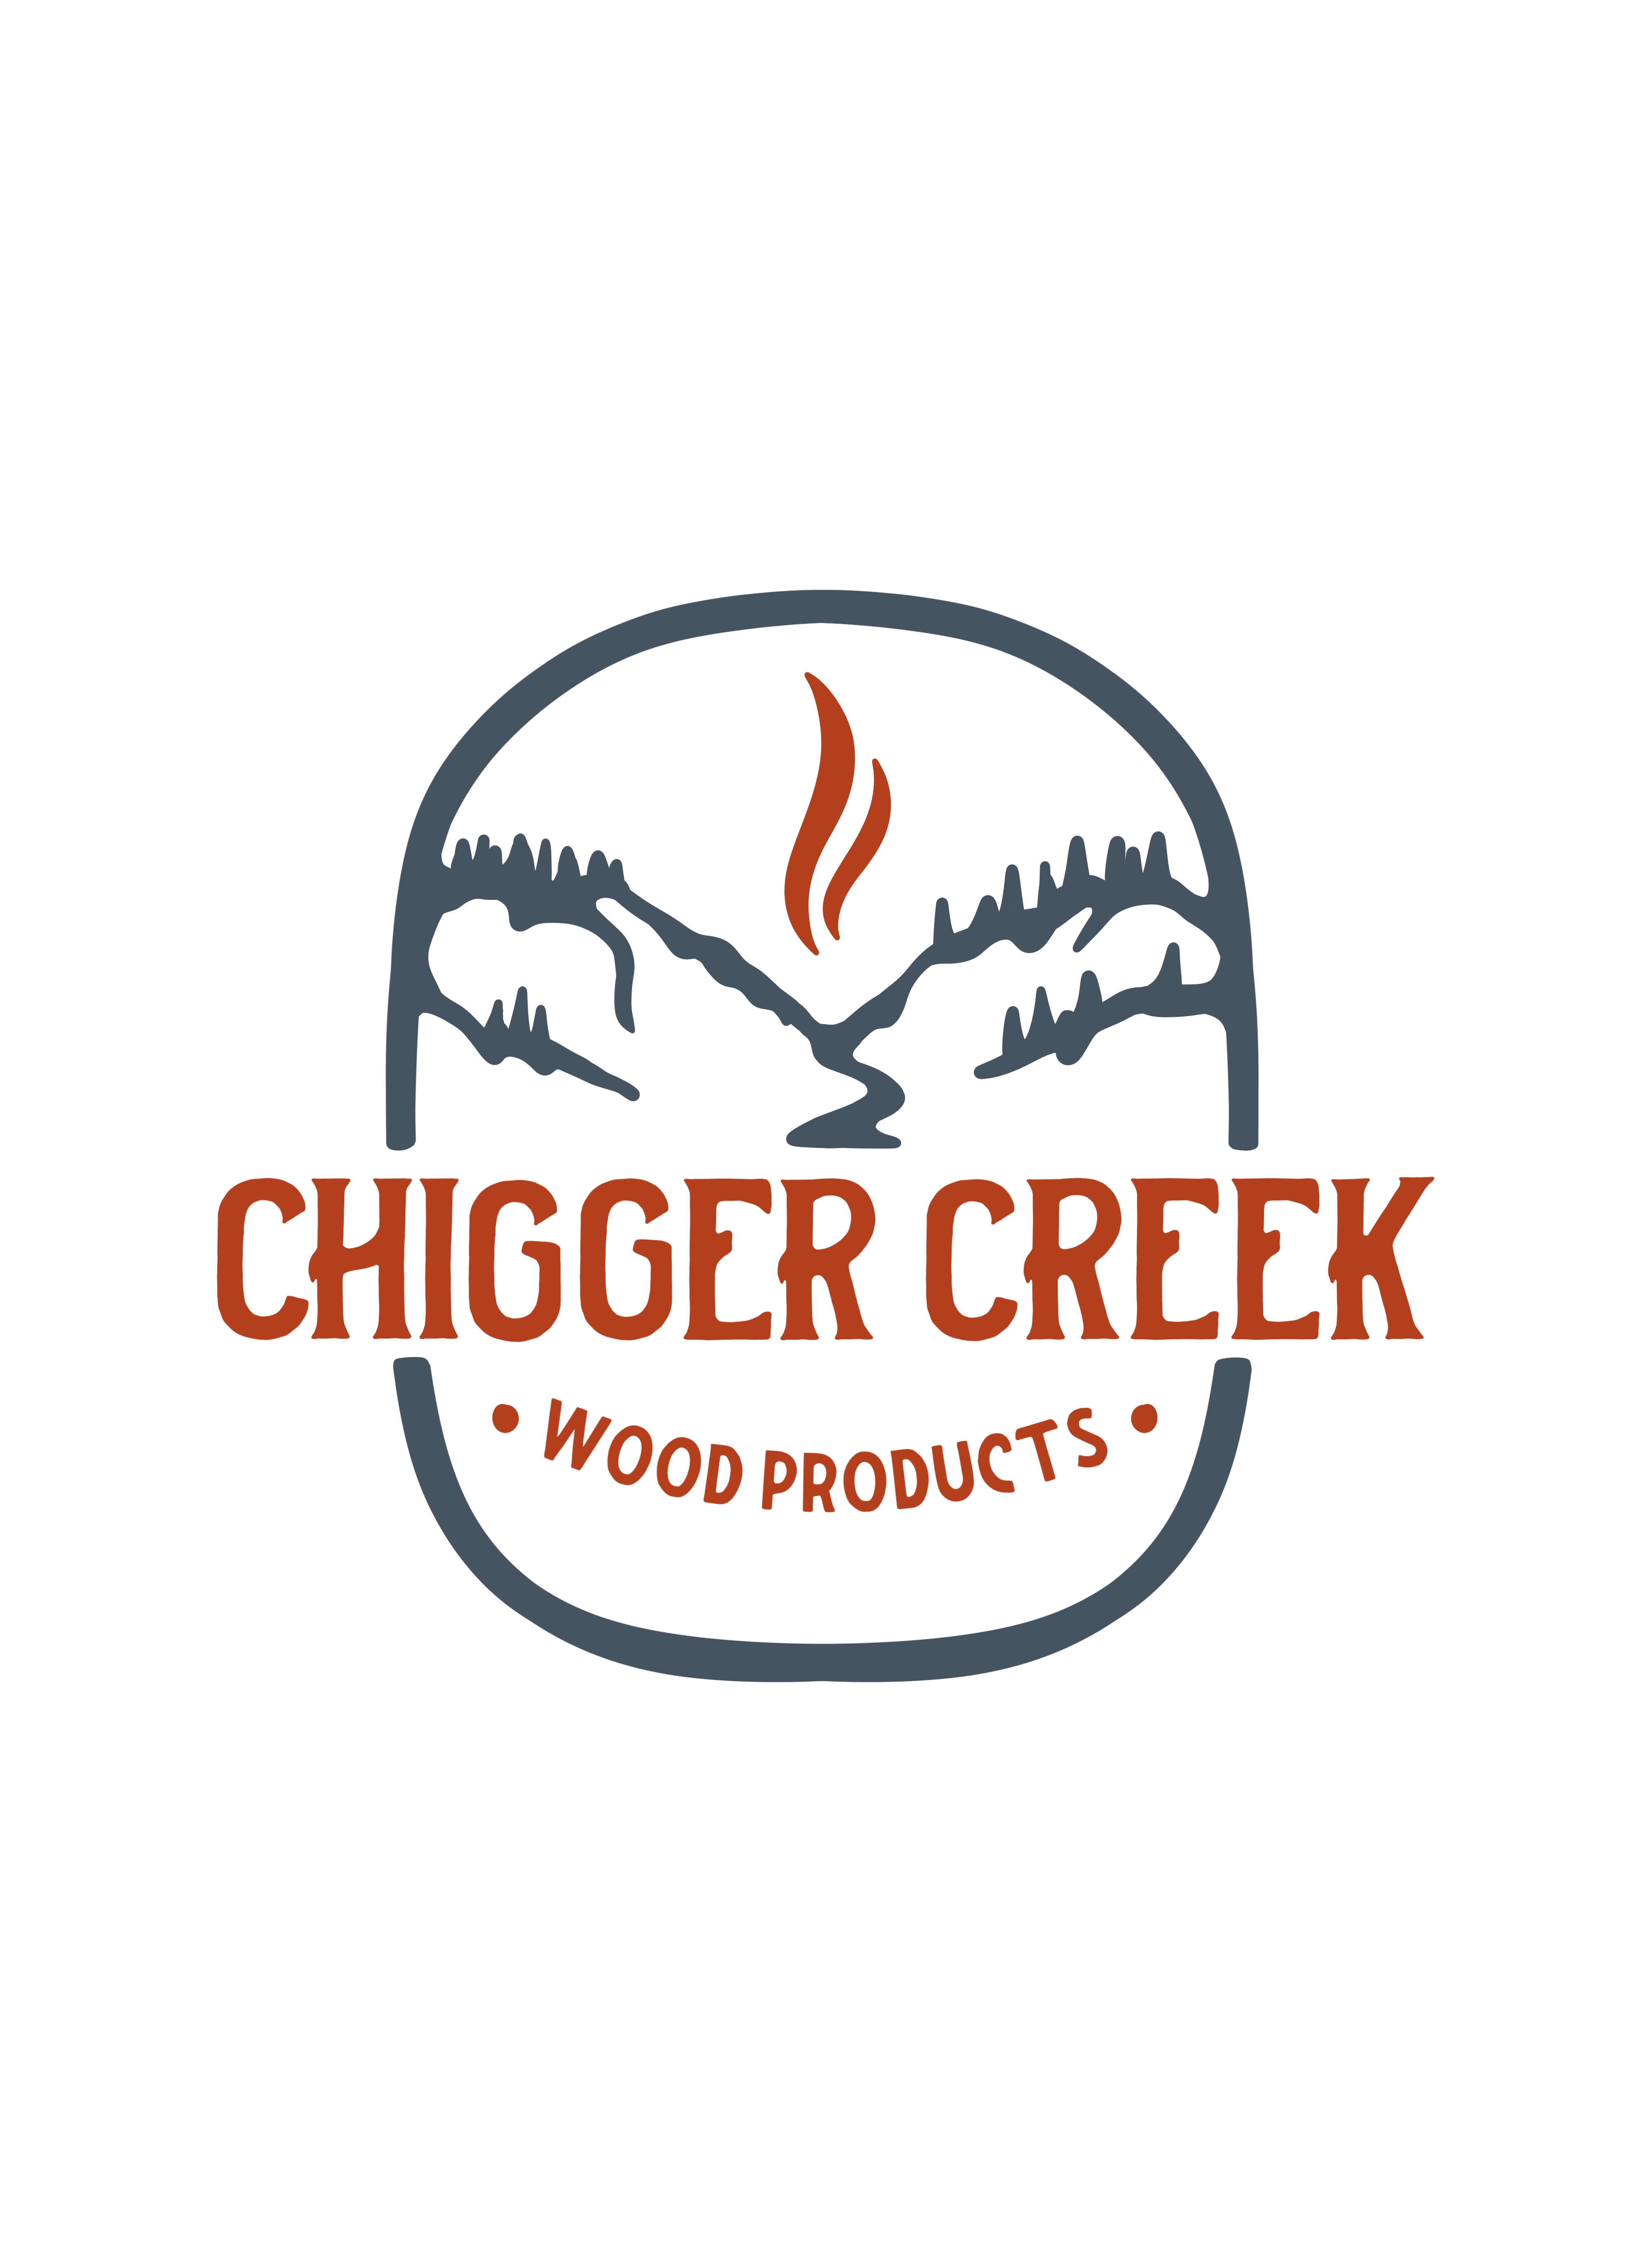 Sweet 'N Smoky Apple/Hickory Blend Chips - Chigger Creek Wood Products